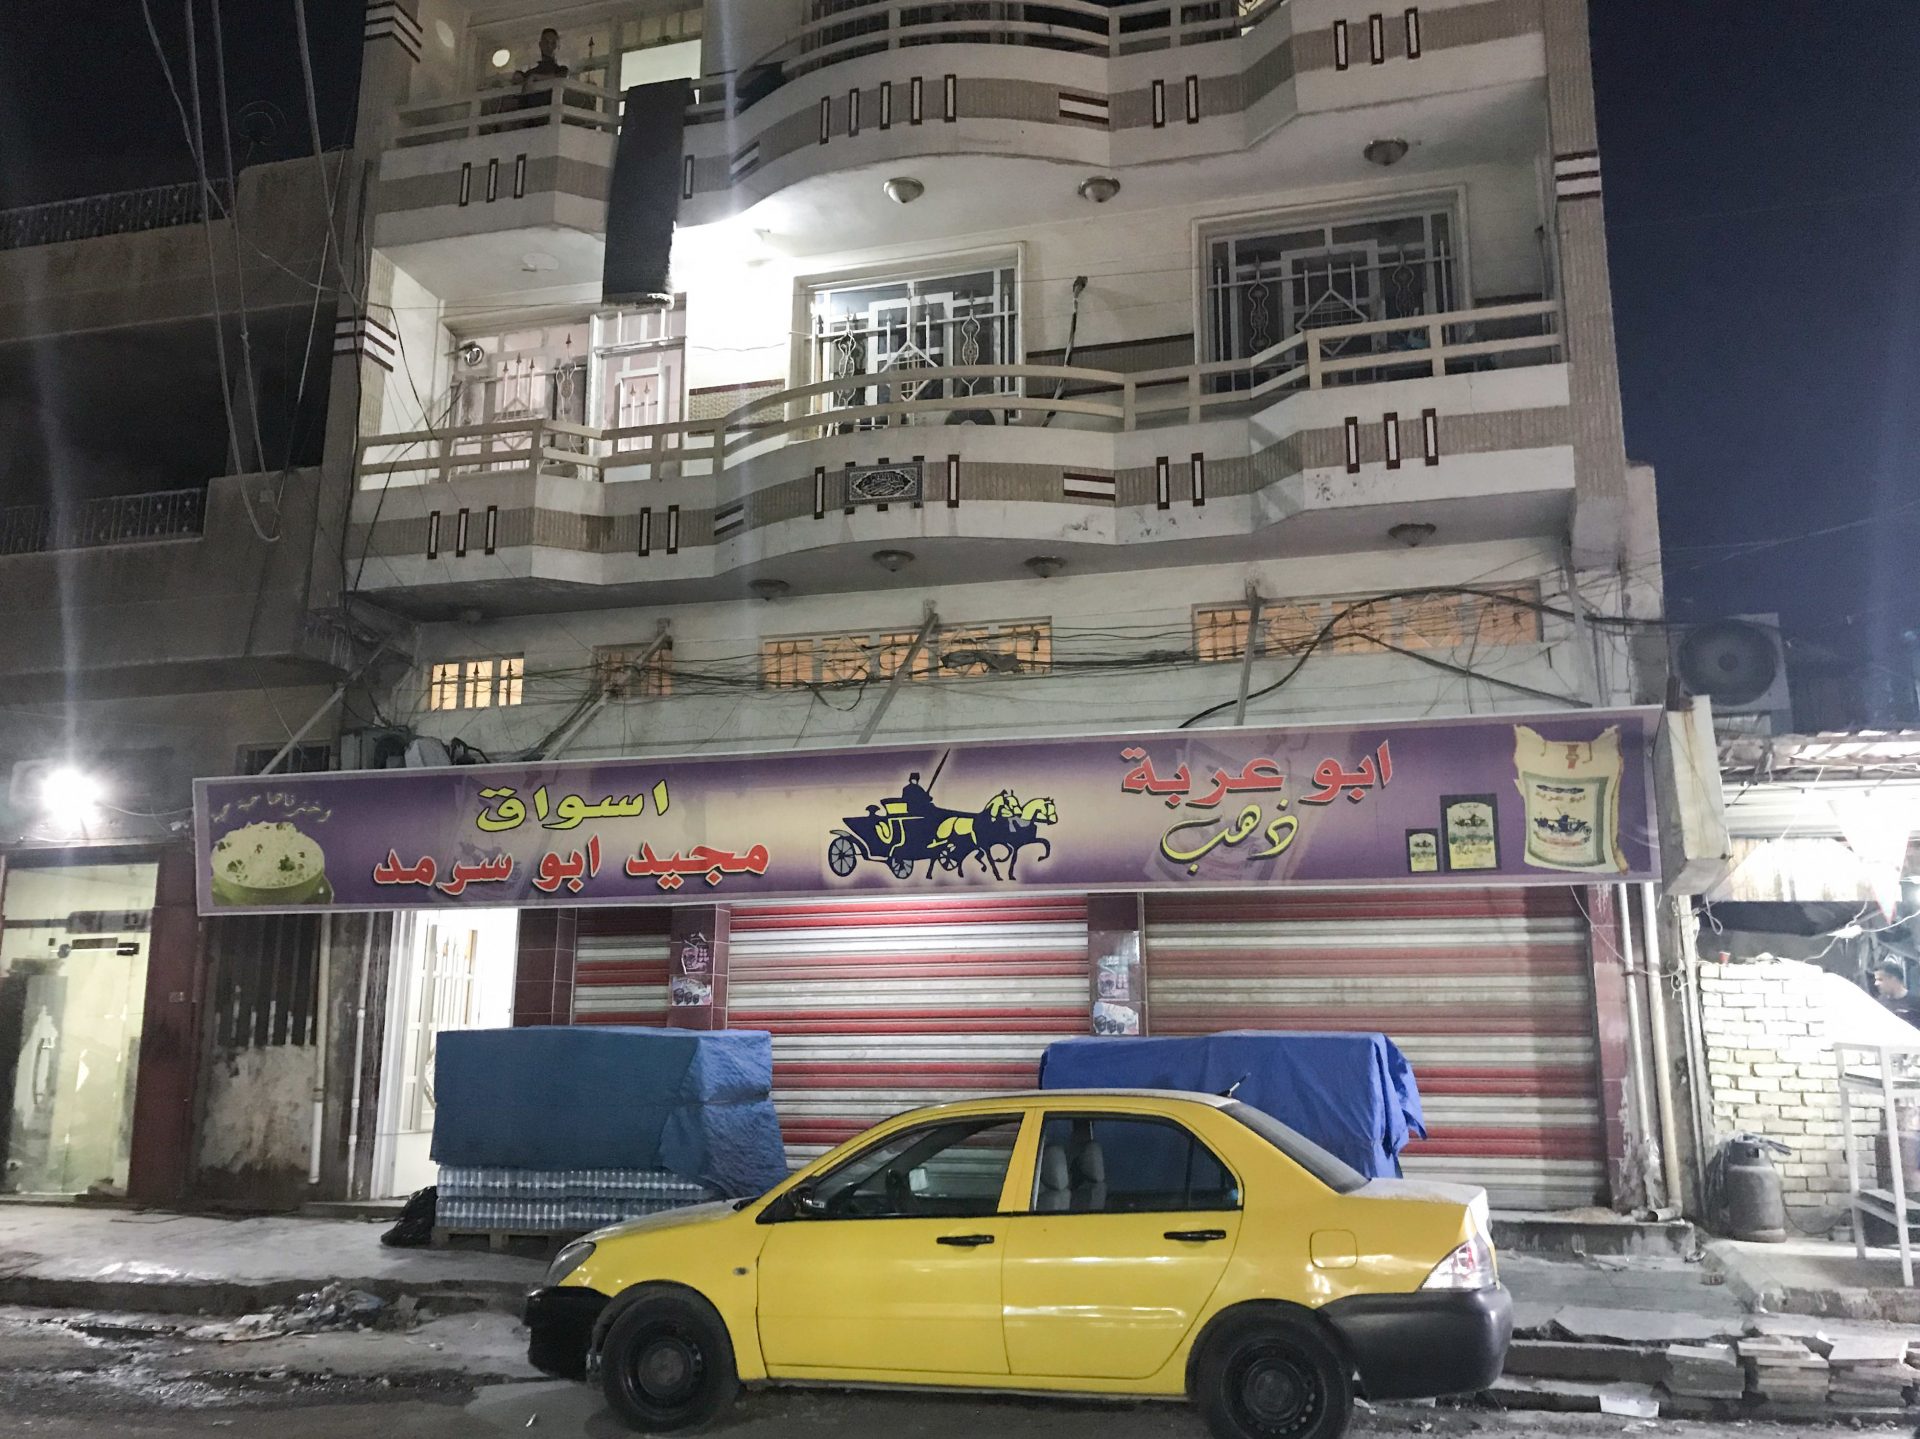 In a video shot outside the shuttered shops on this street in Baghdad this summer, Jimmy Aldaoud said he was scared and sick. He died two weeks later.